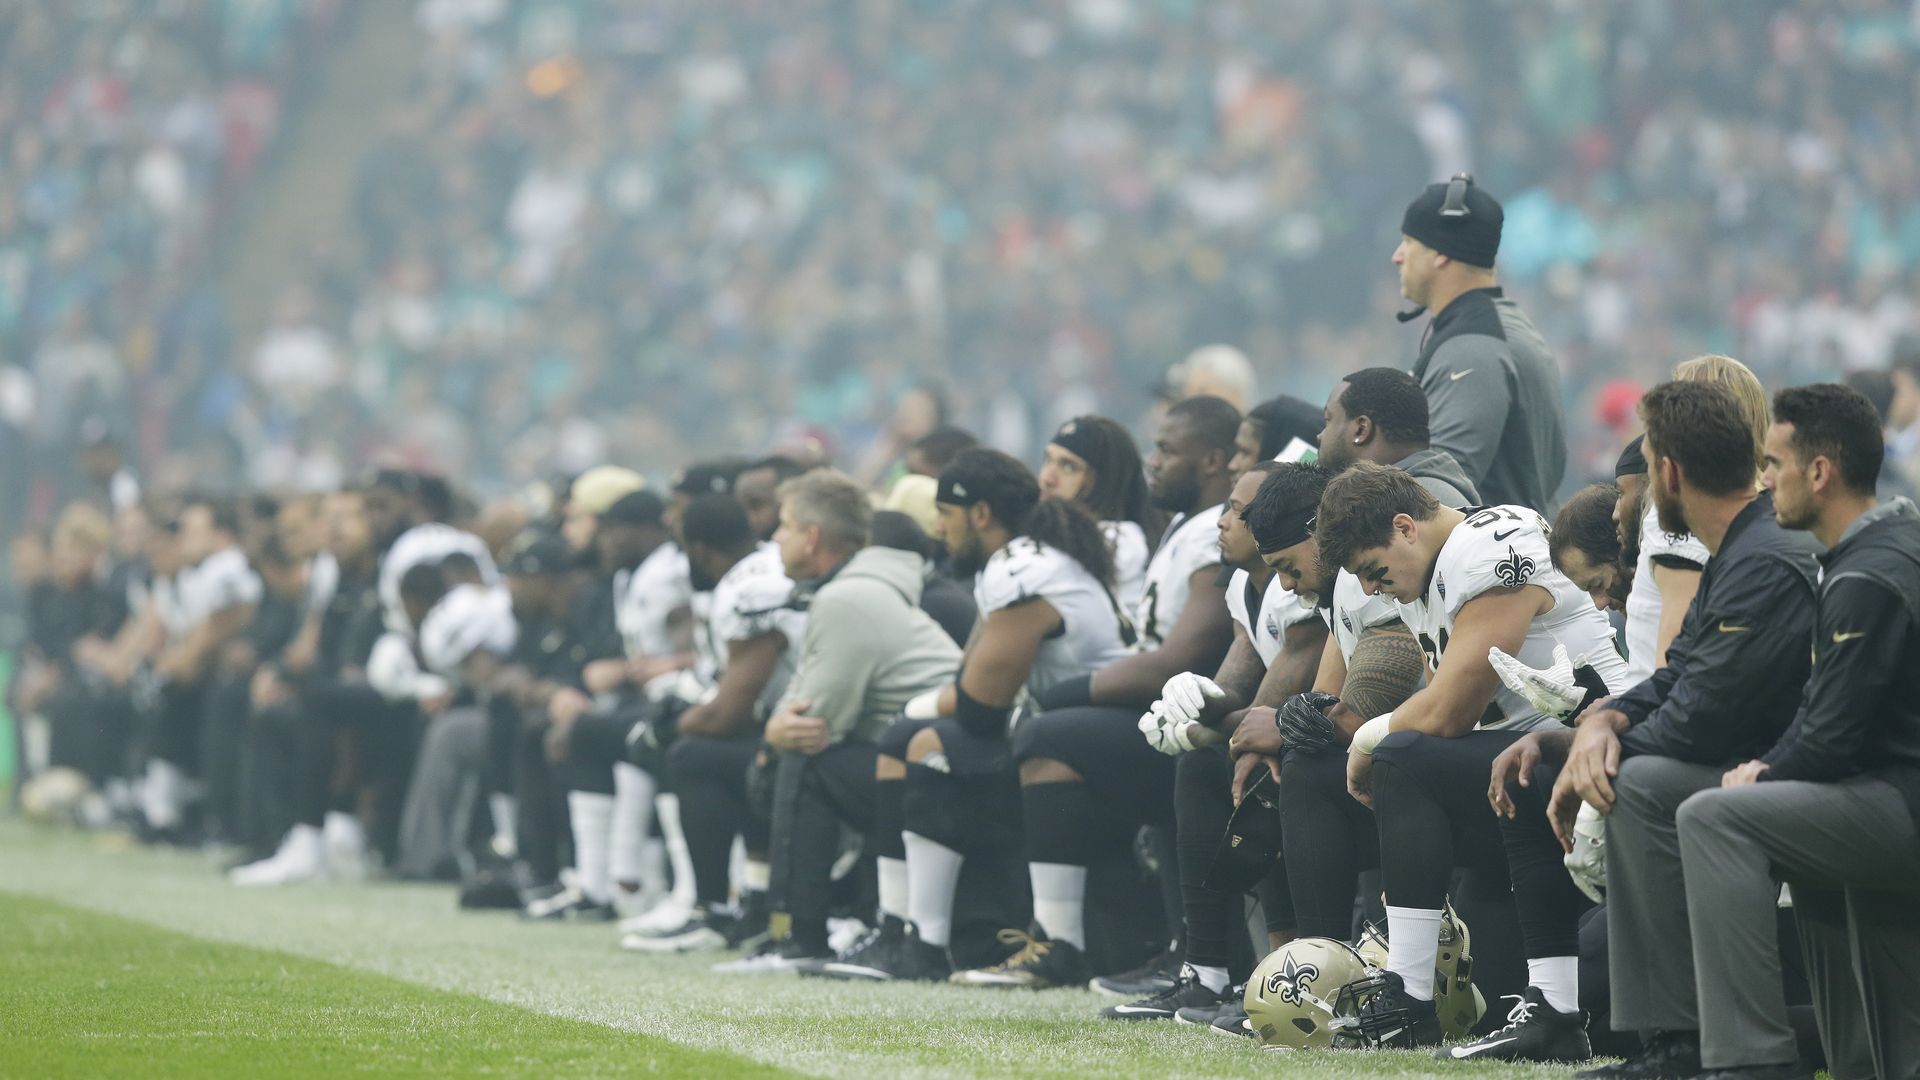 The New Orleans Saints players kneel before the anthem is played.